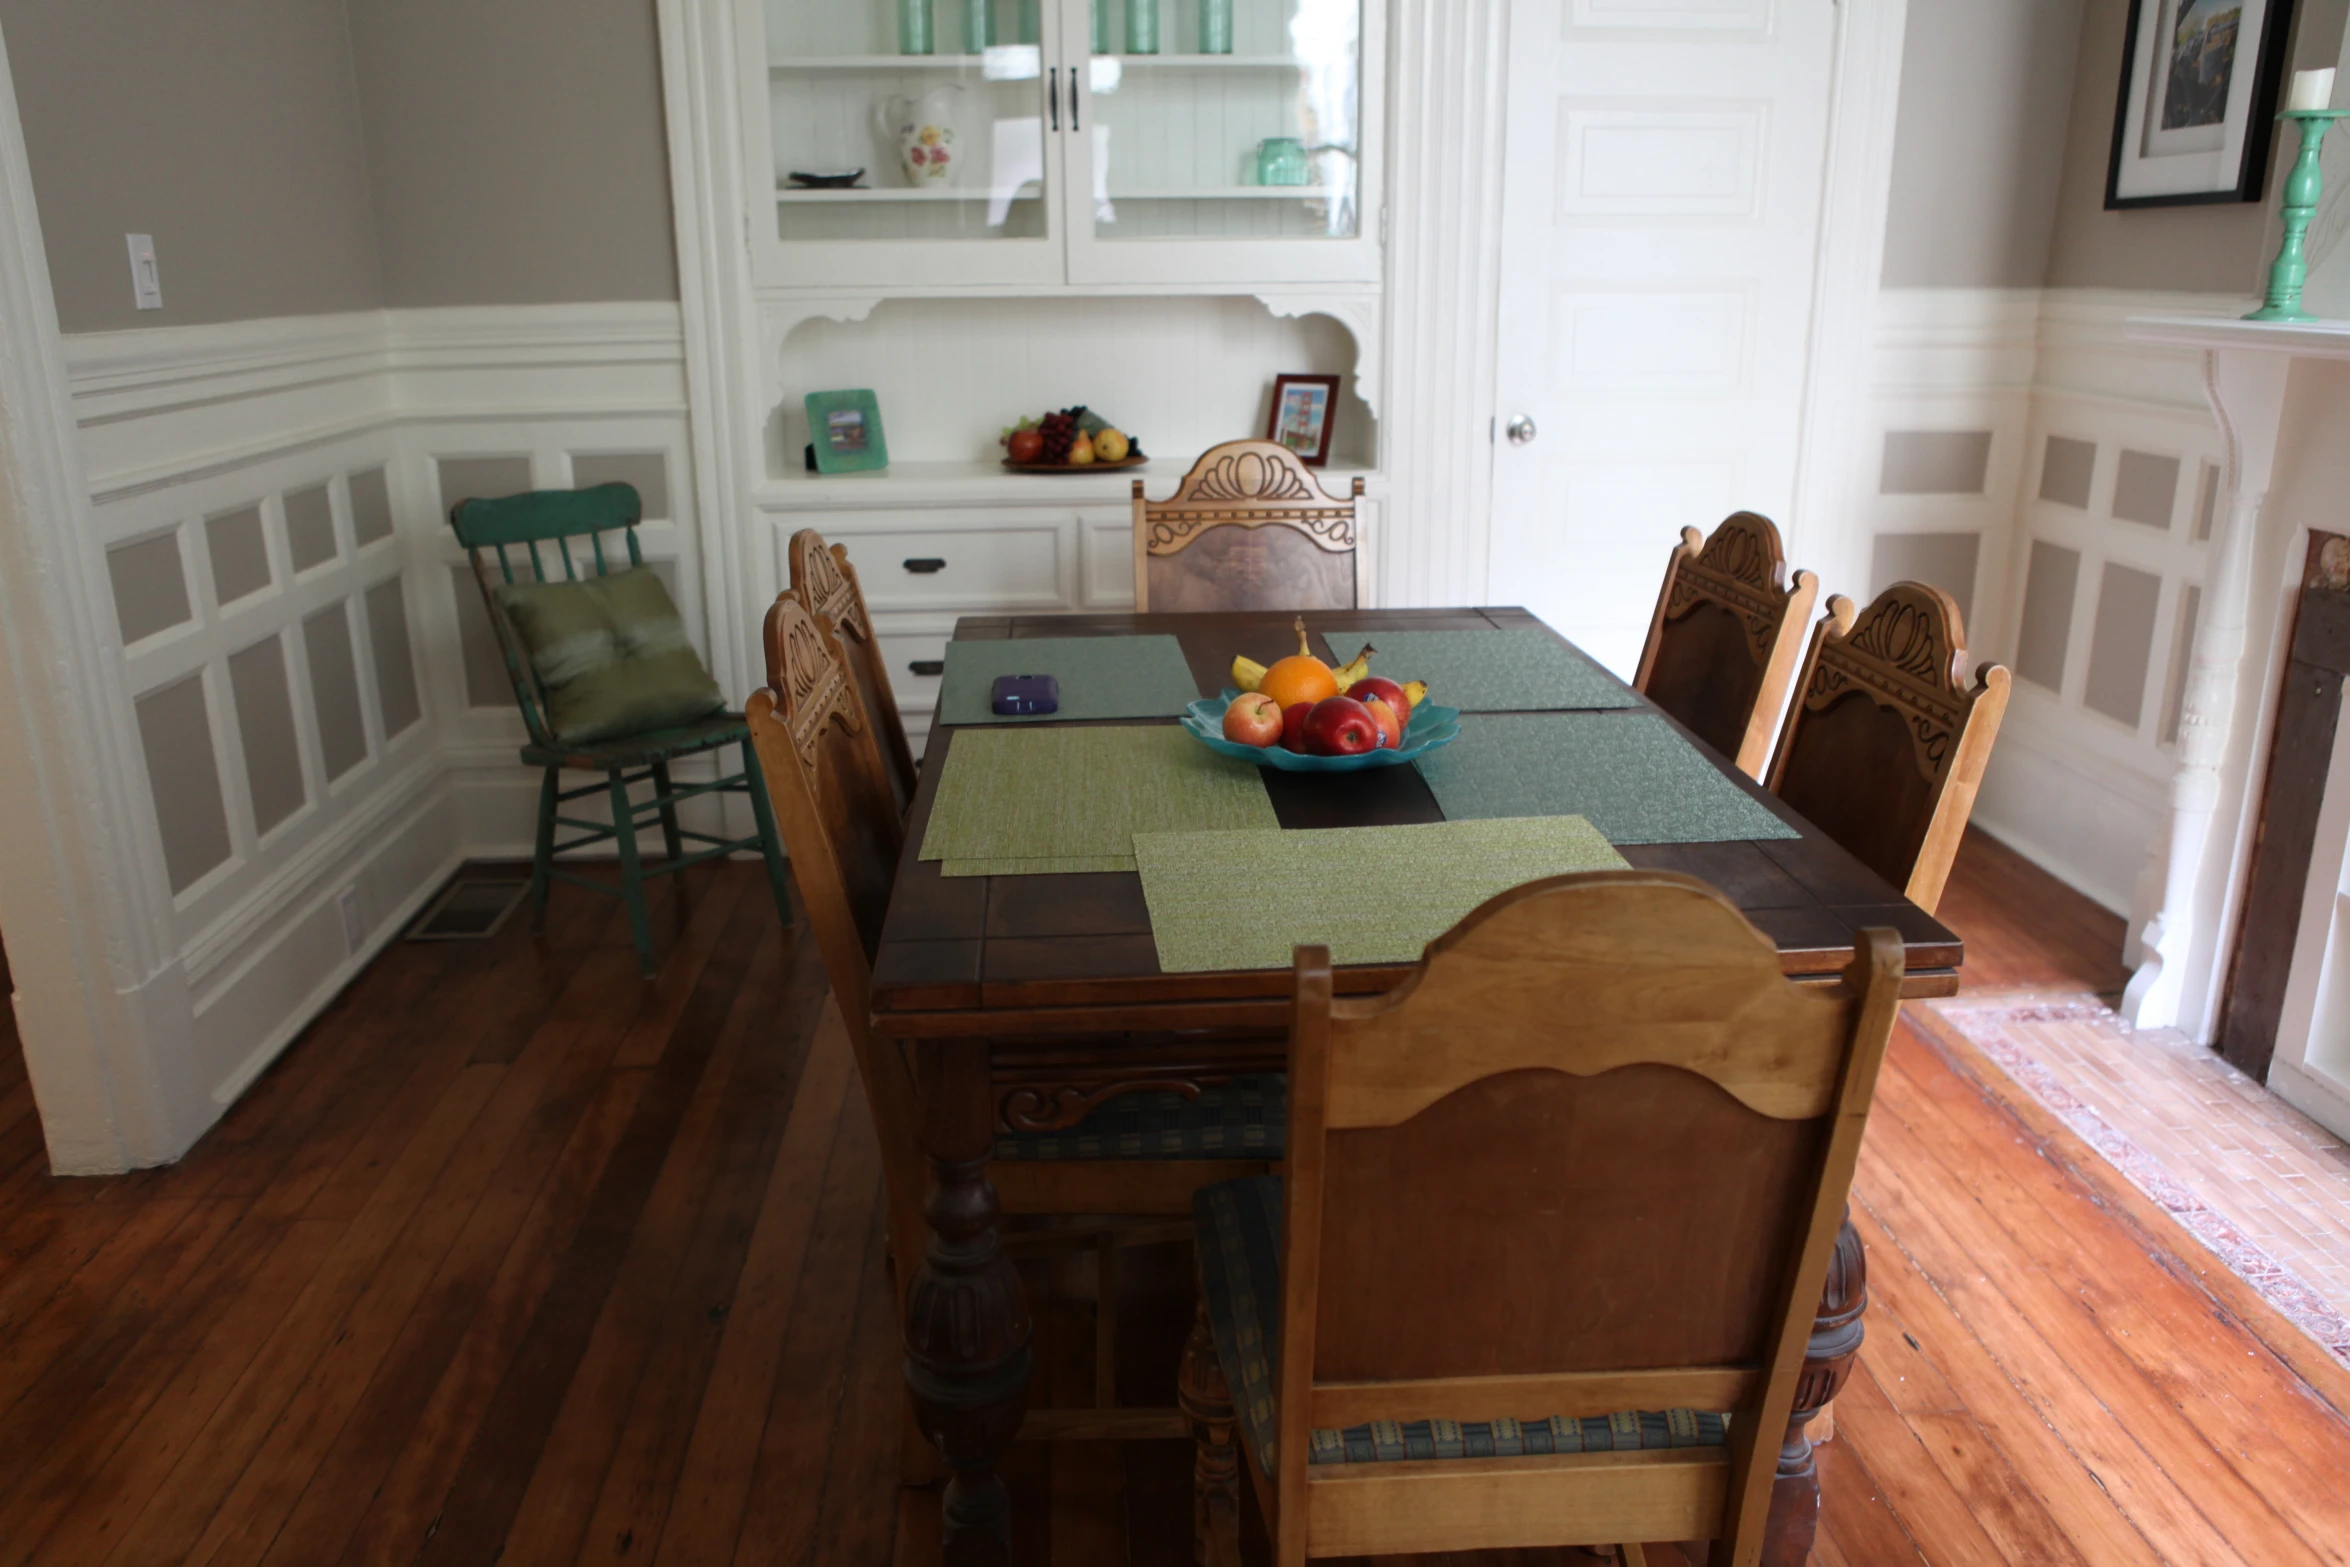 a dining room has a table with chairs and fruits on it